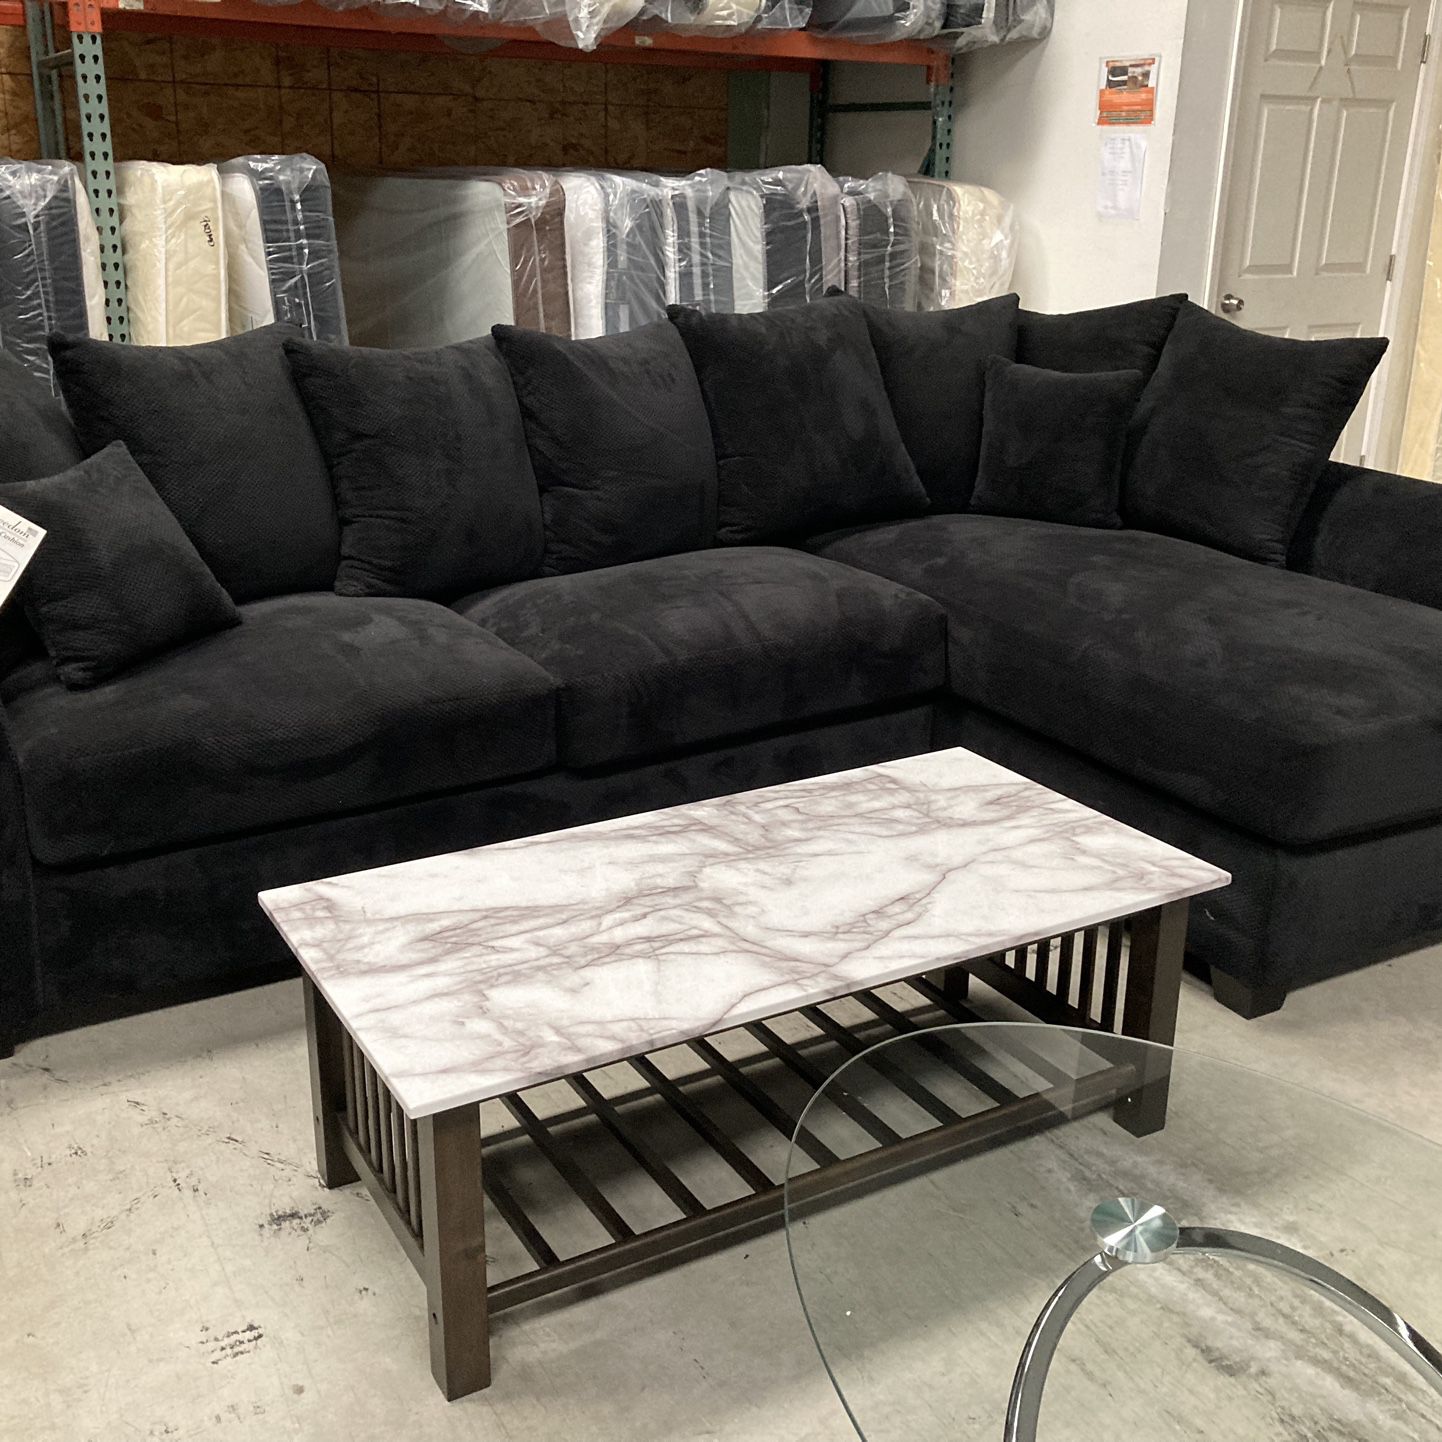 Black Sectional Sofa And Coffee Table. New! Please See Description. 